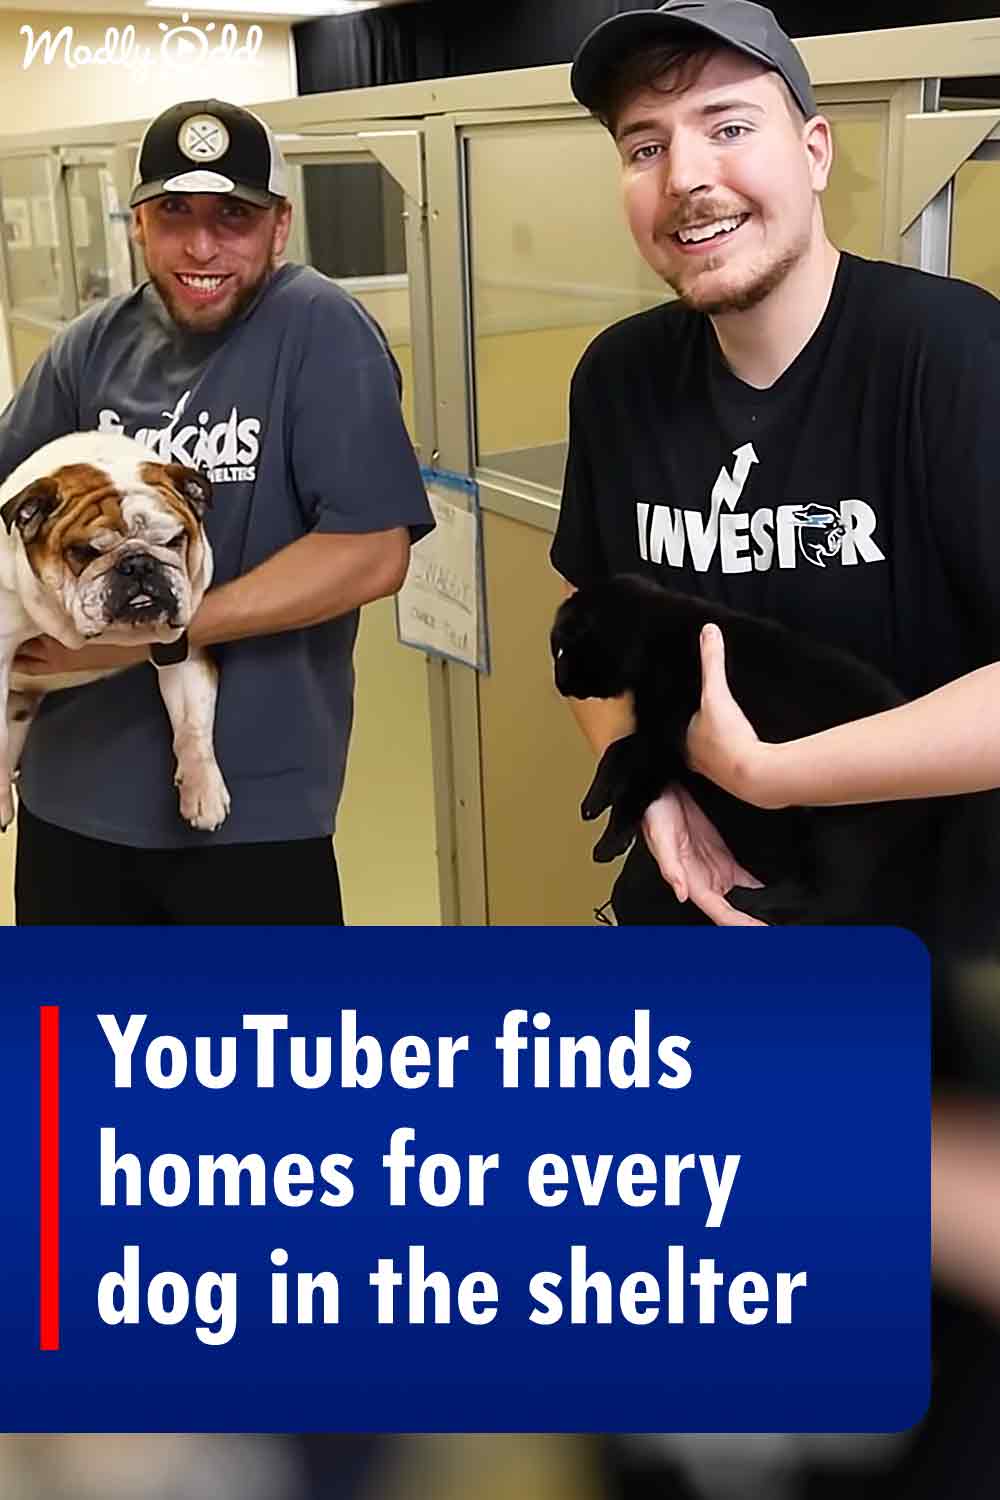 YouTuber finds homes for every dog in the shelter